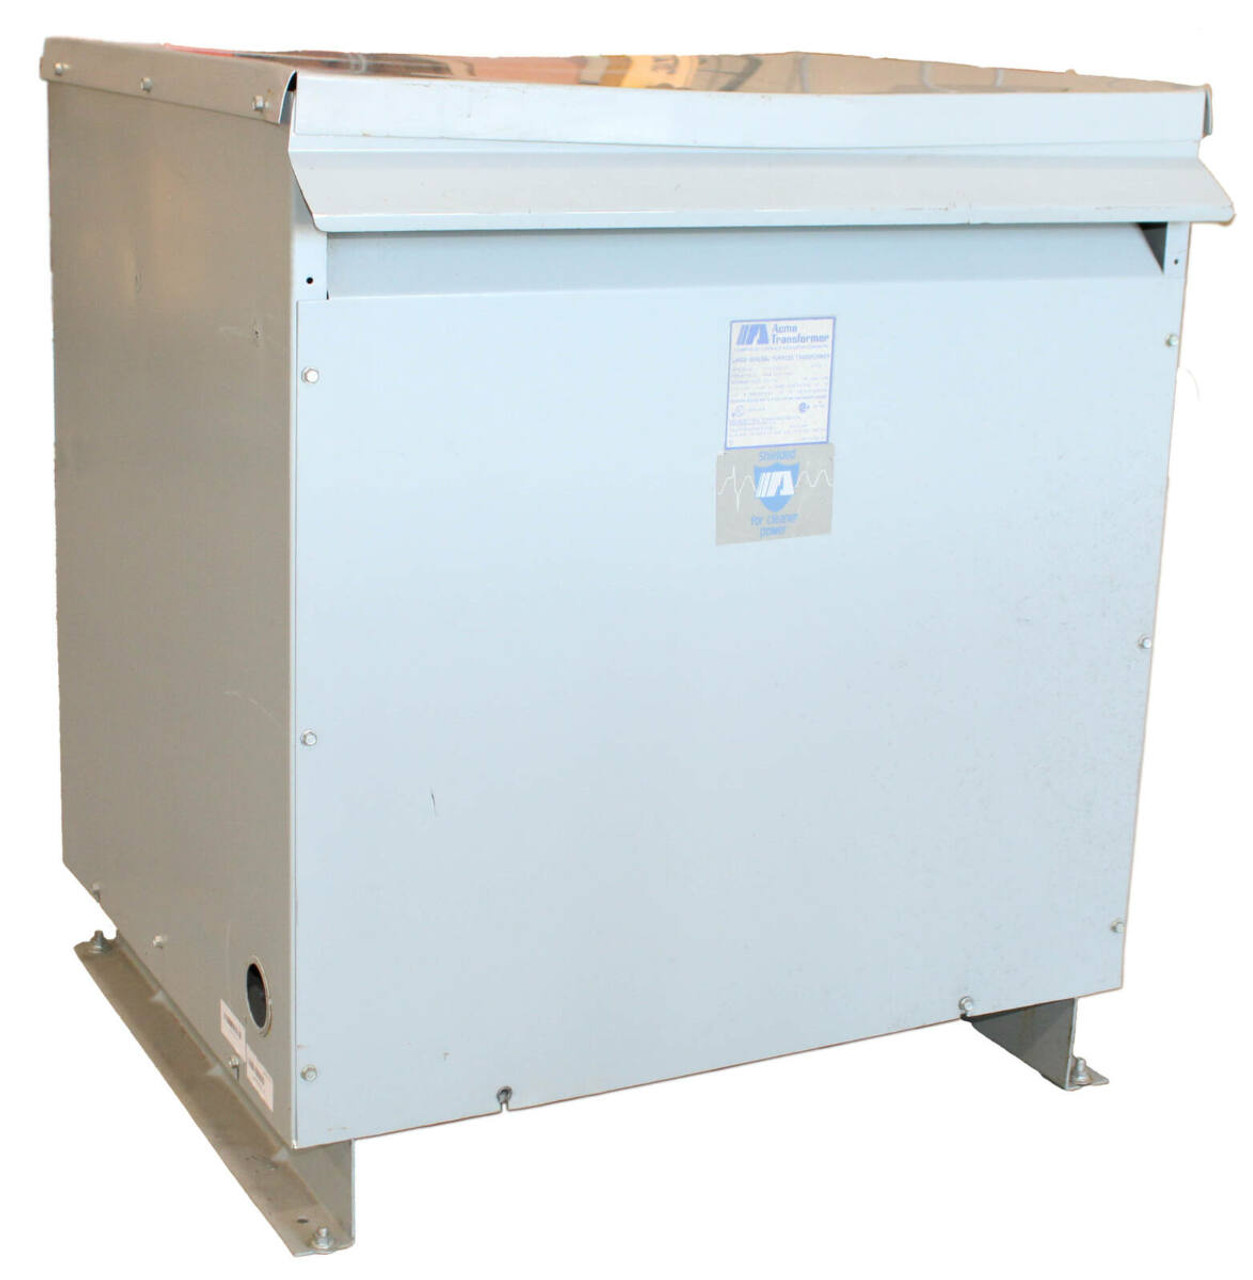 ACME T-2A-53315-3S General Purpose Transformer 112.5KVA Primary: 480 Secondary: 208Y/120 3PH